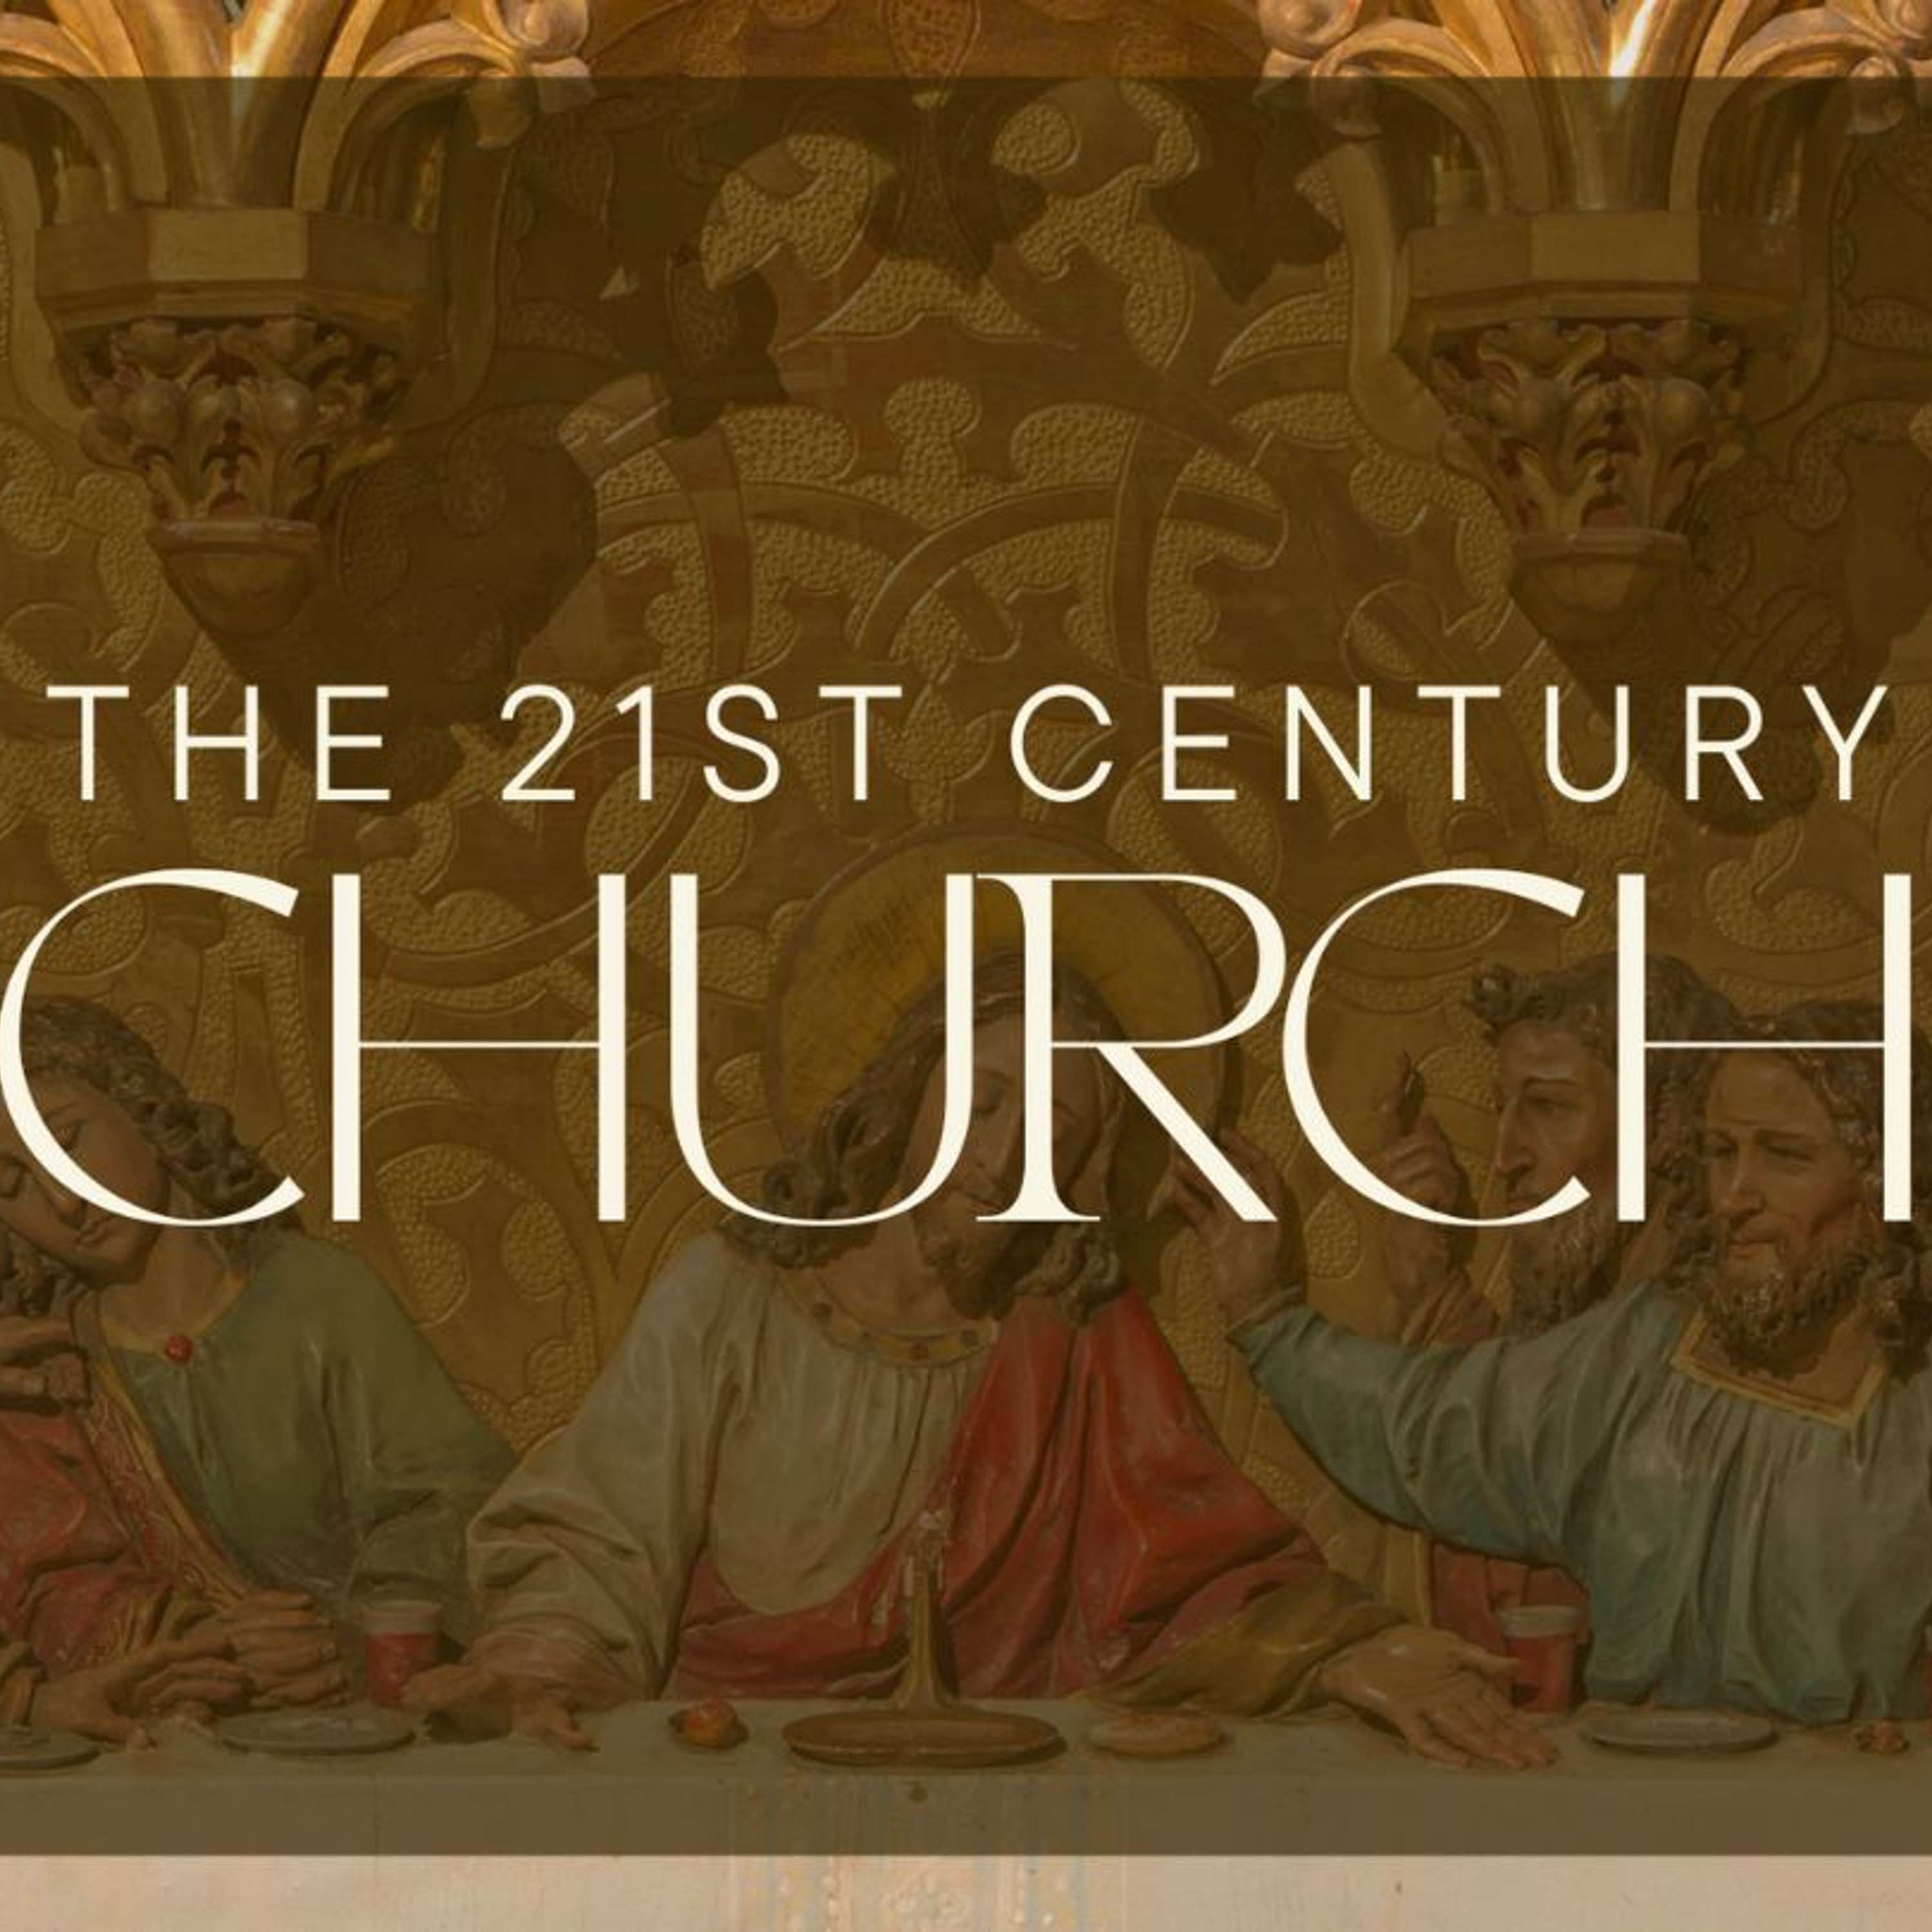 21st Century Church: Acts 7 - Where is Your Focus?